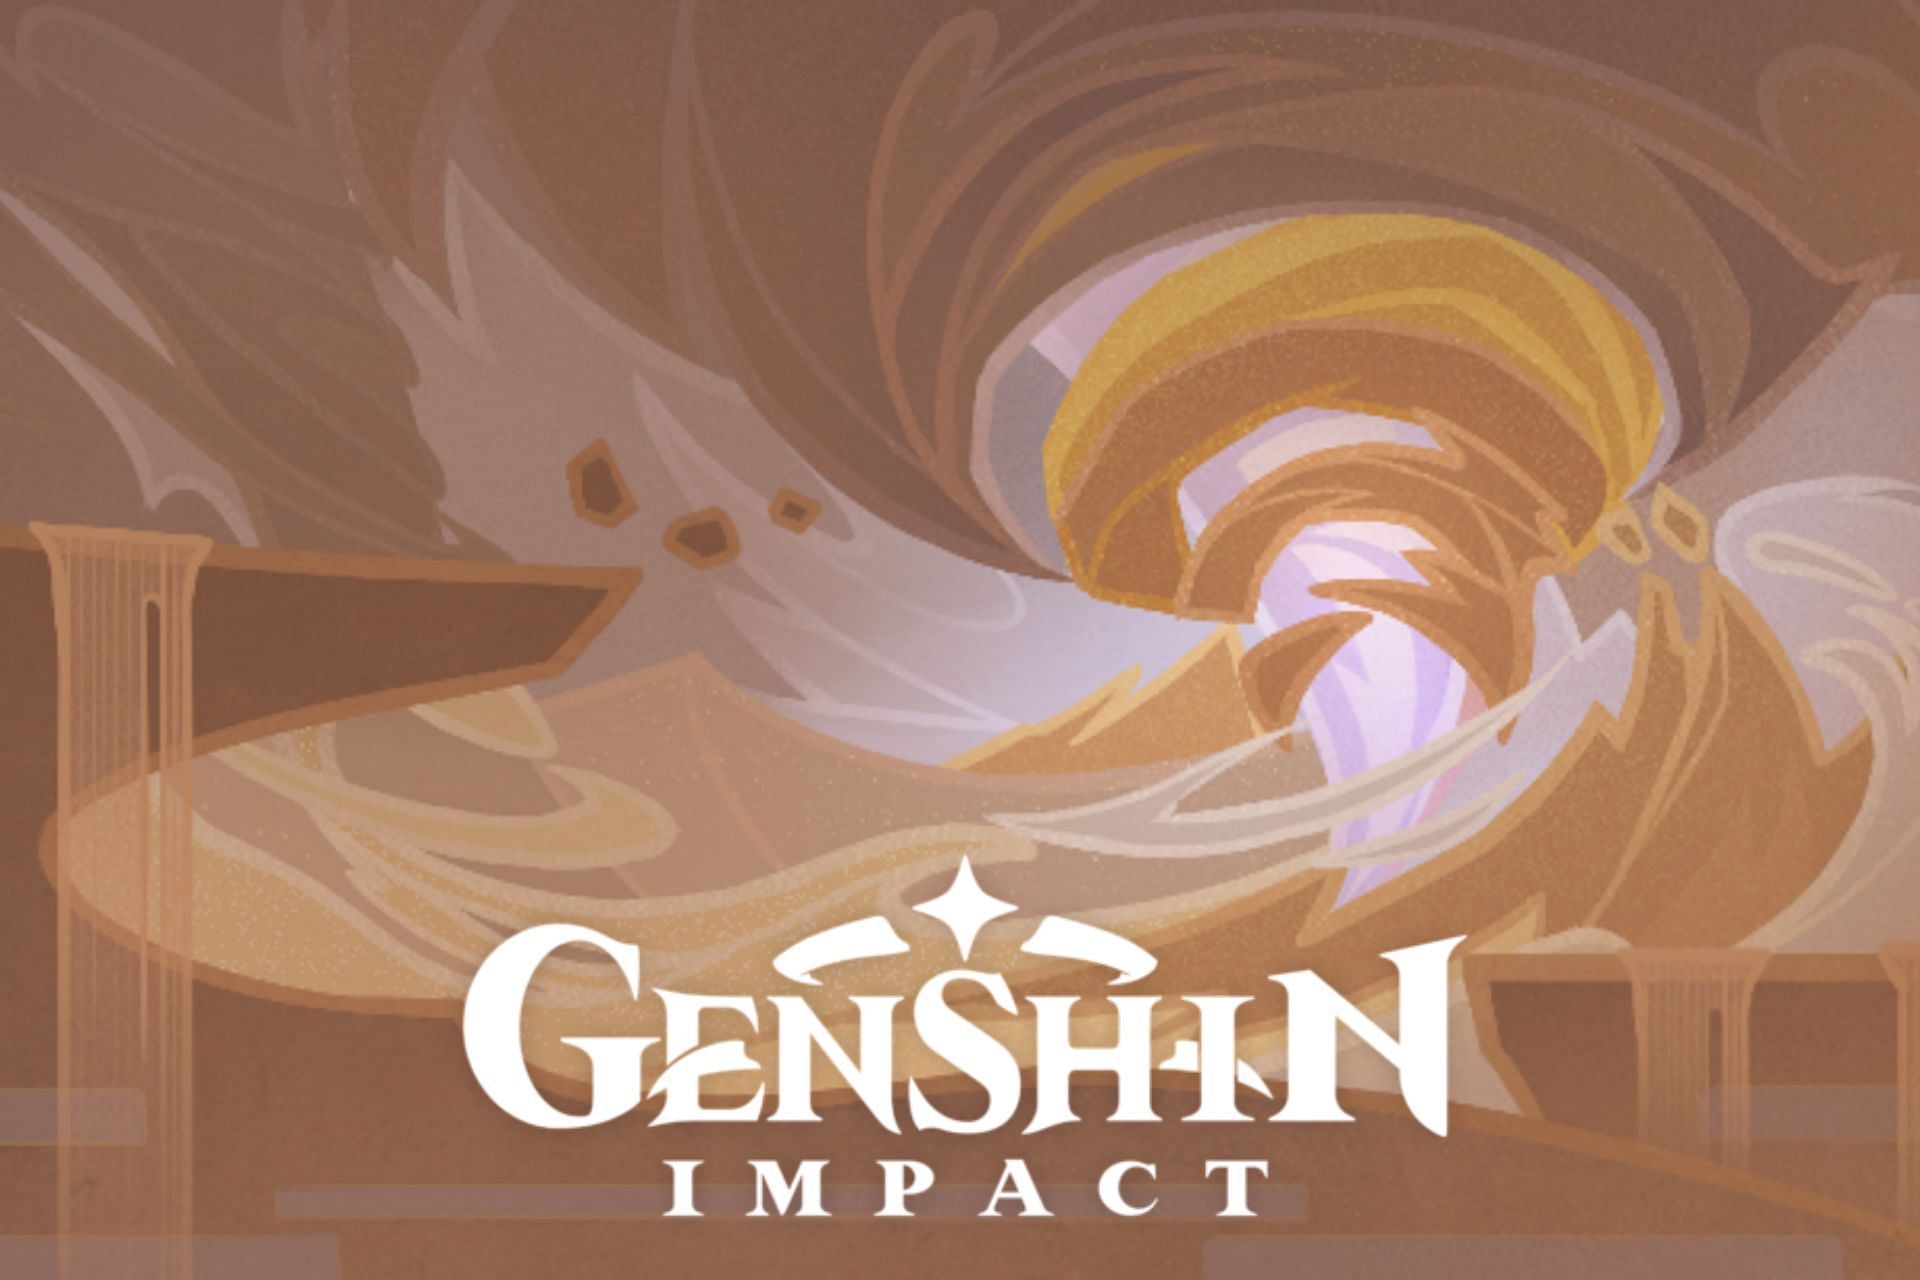 Genshin Impact 3.4: Release date, characters, and new region